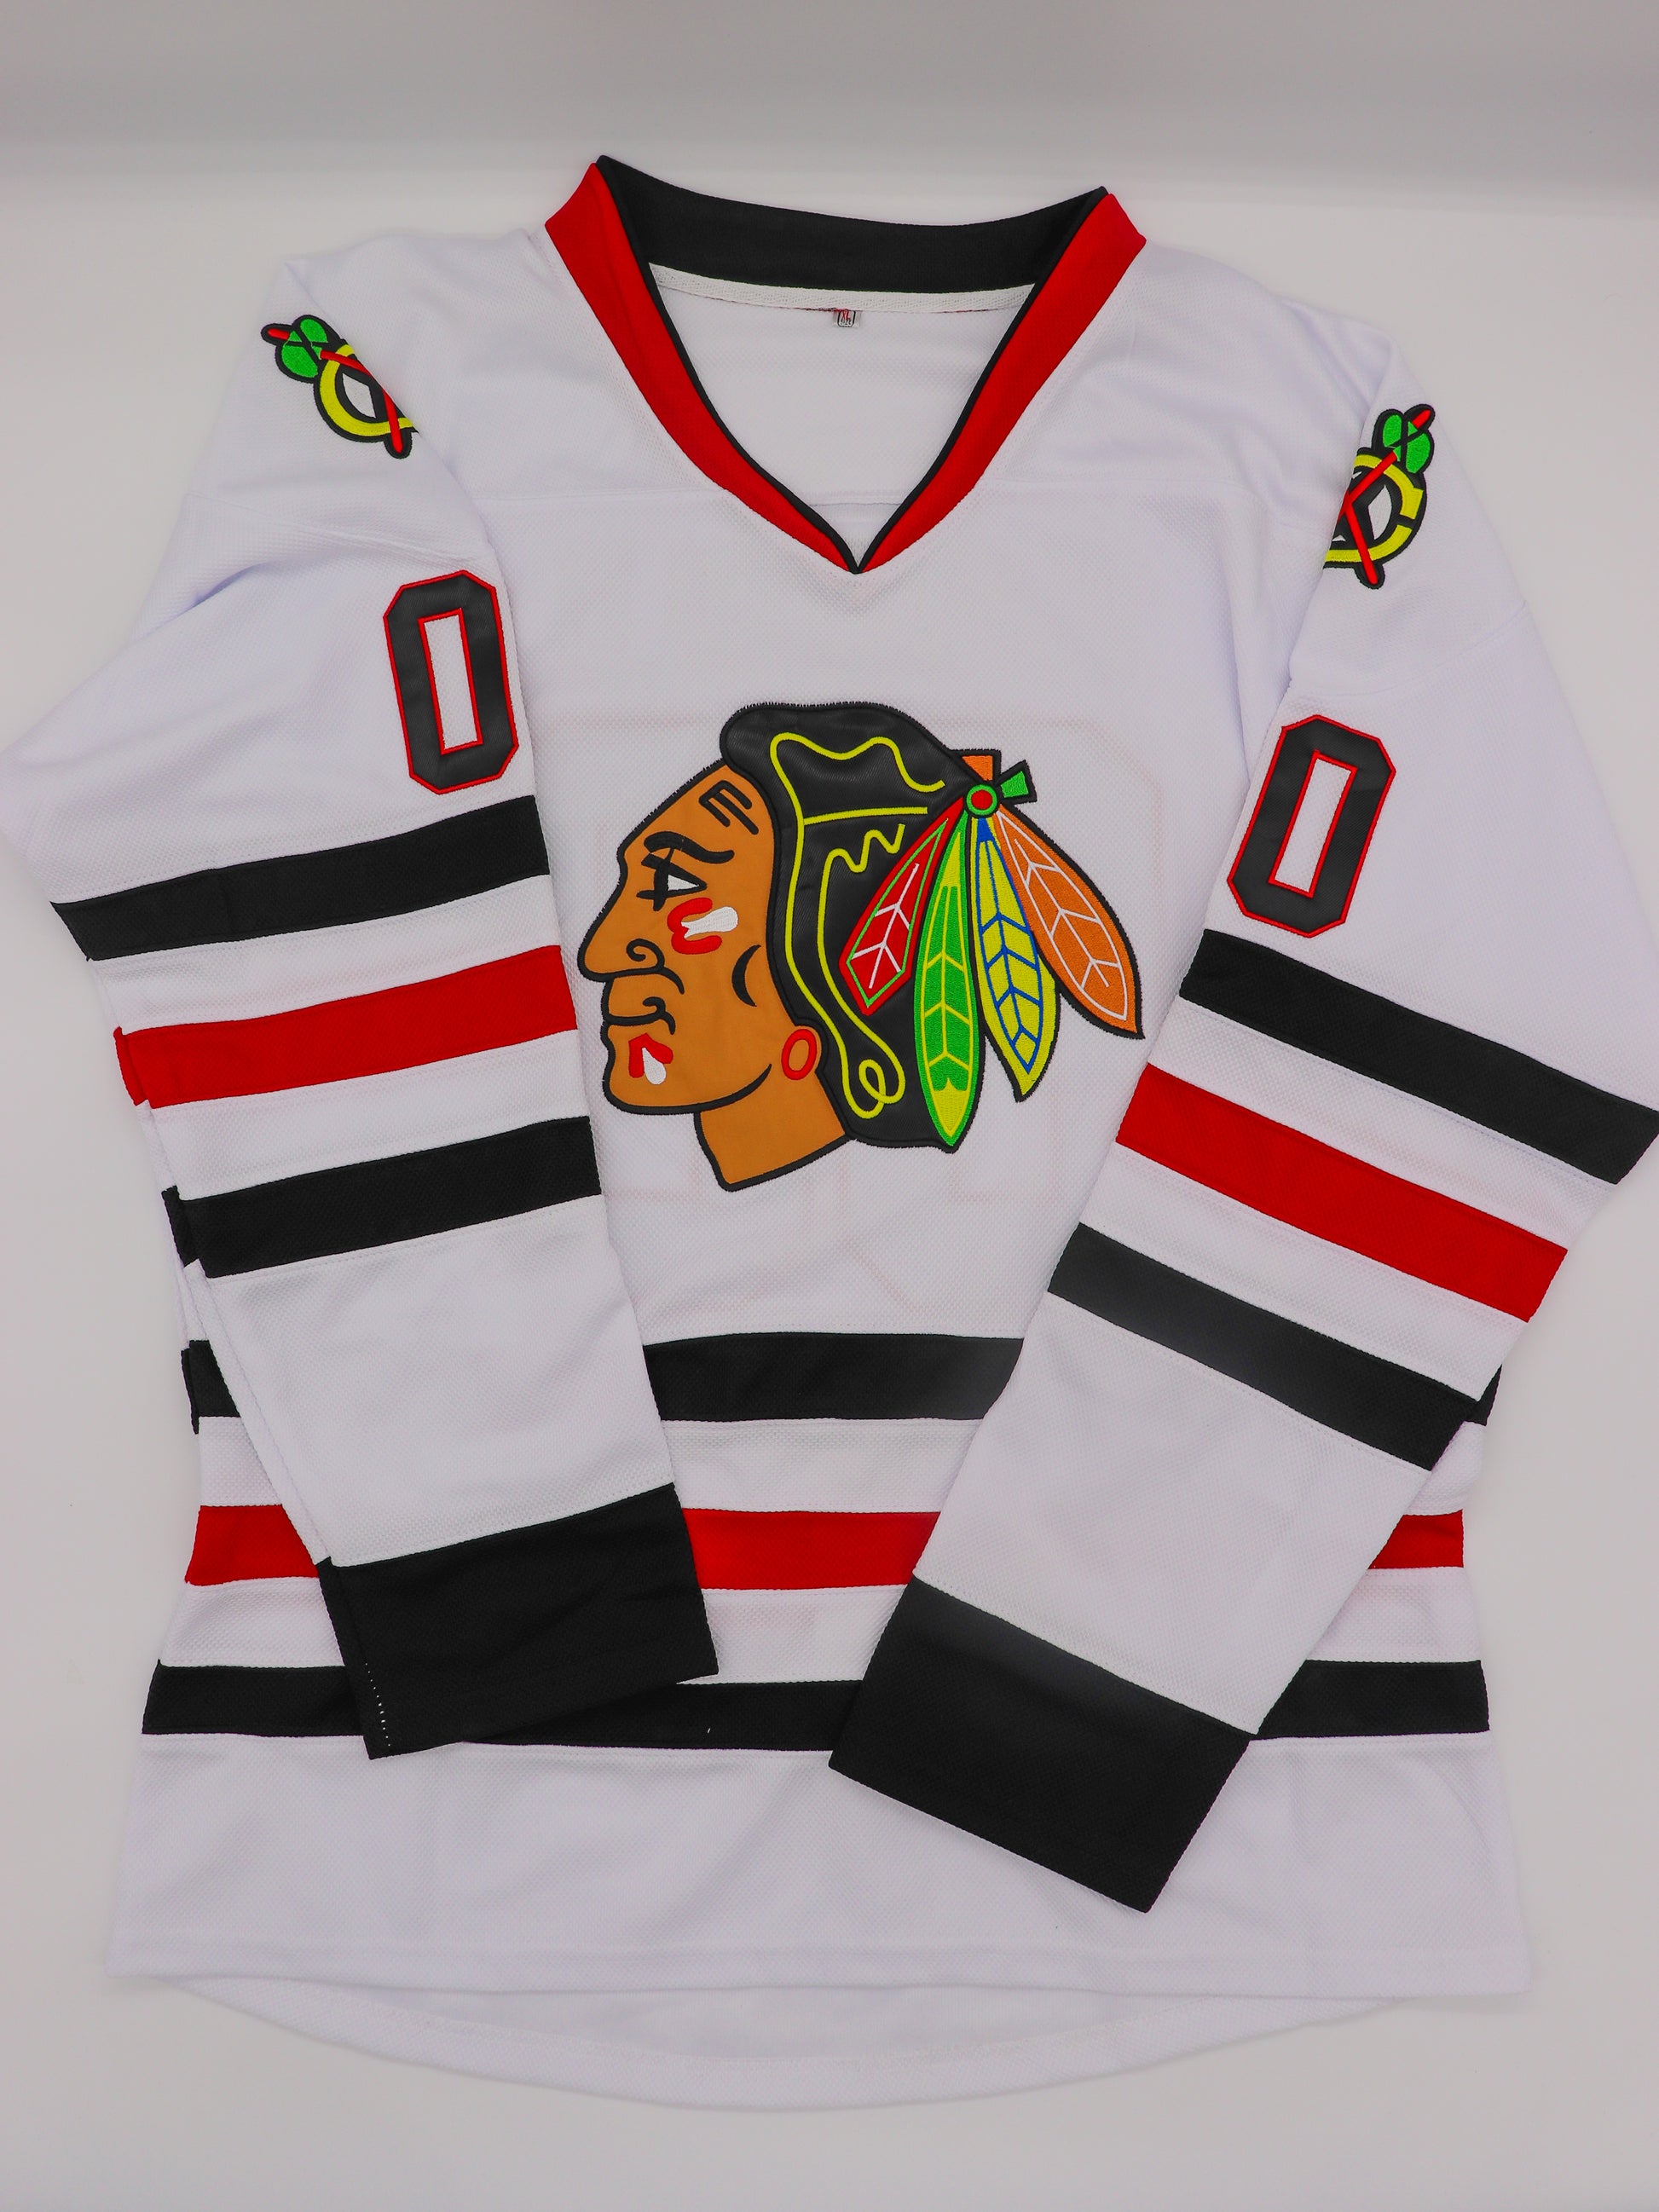 Clark Griswold - Chicago Blackhawks Jersey from Christmas Vacation   Griswold christmas vacation, Clark griswold christmas, Clark griswold  christmas vacation